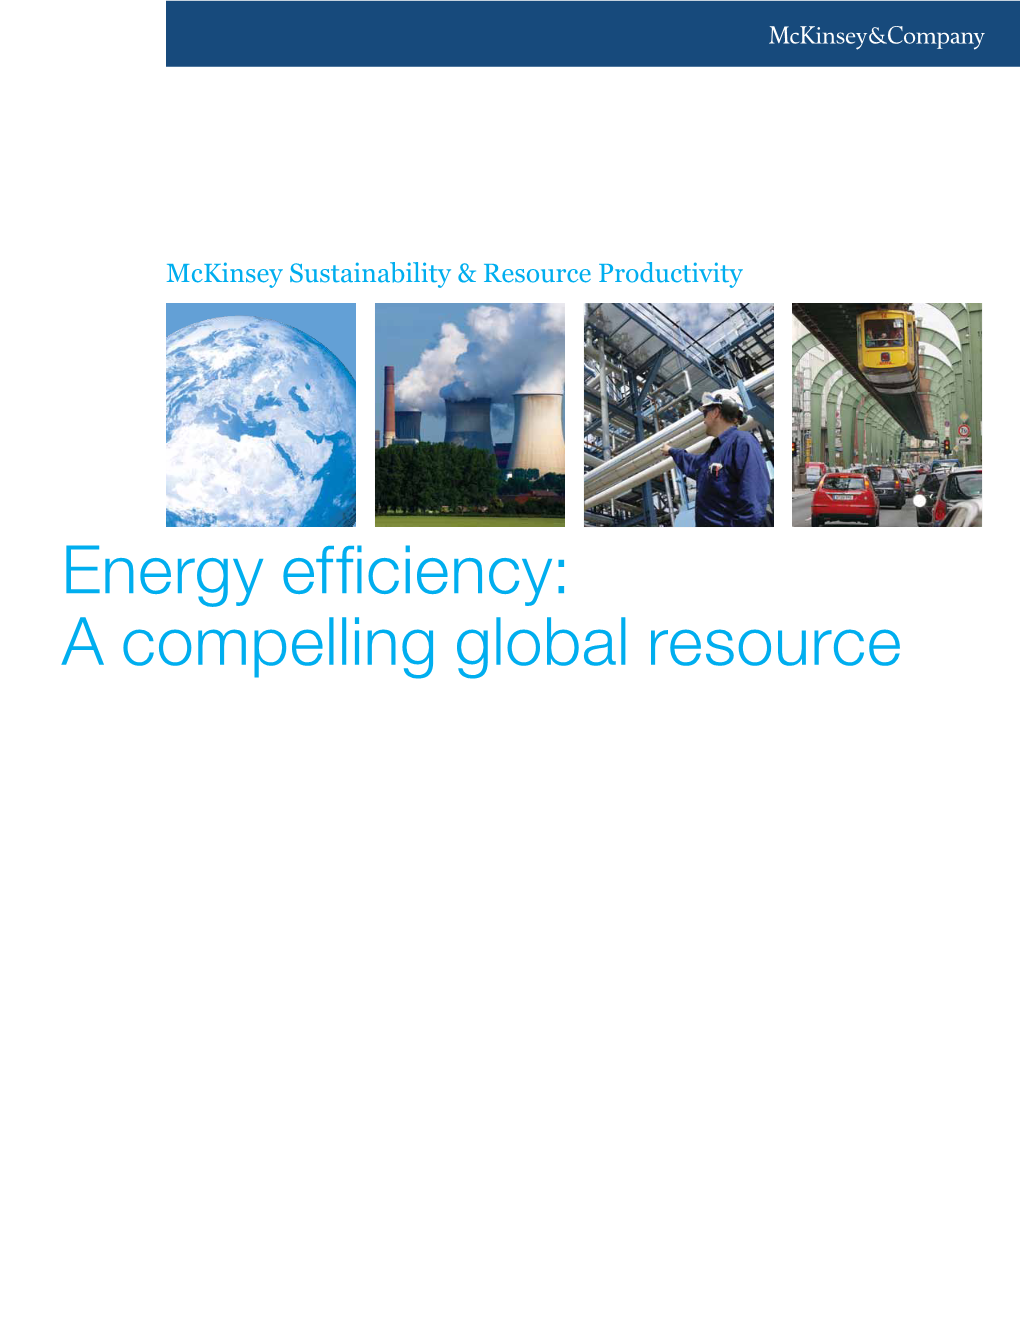 Energy Efficiency: a Compelling Global Resource This Compendium Was Written by Mckinsey & Company Experts and Consultants